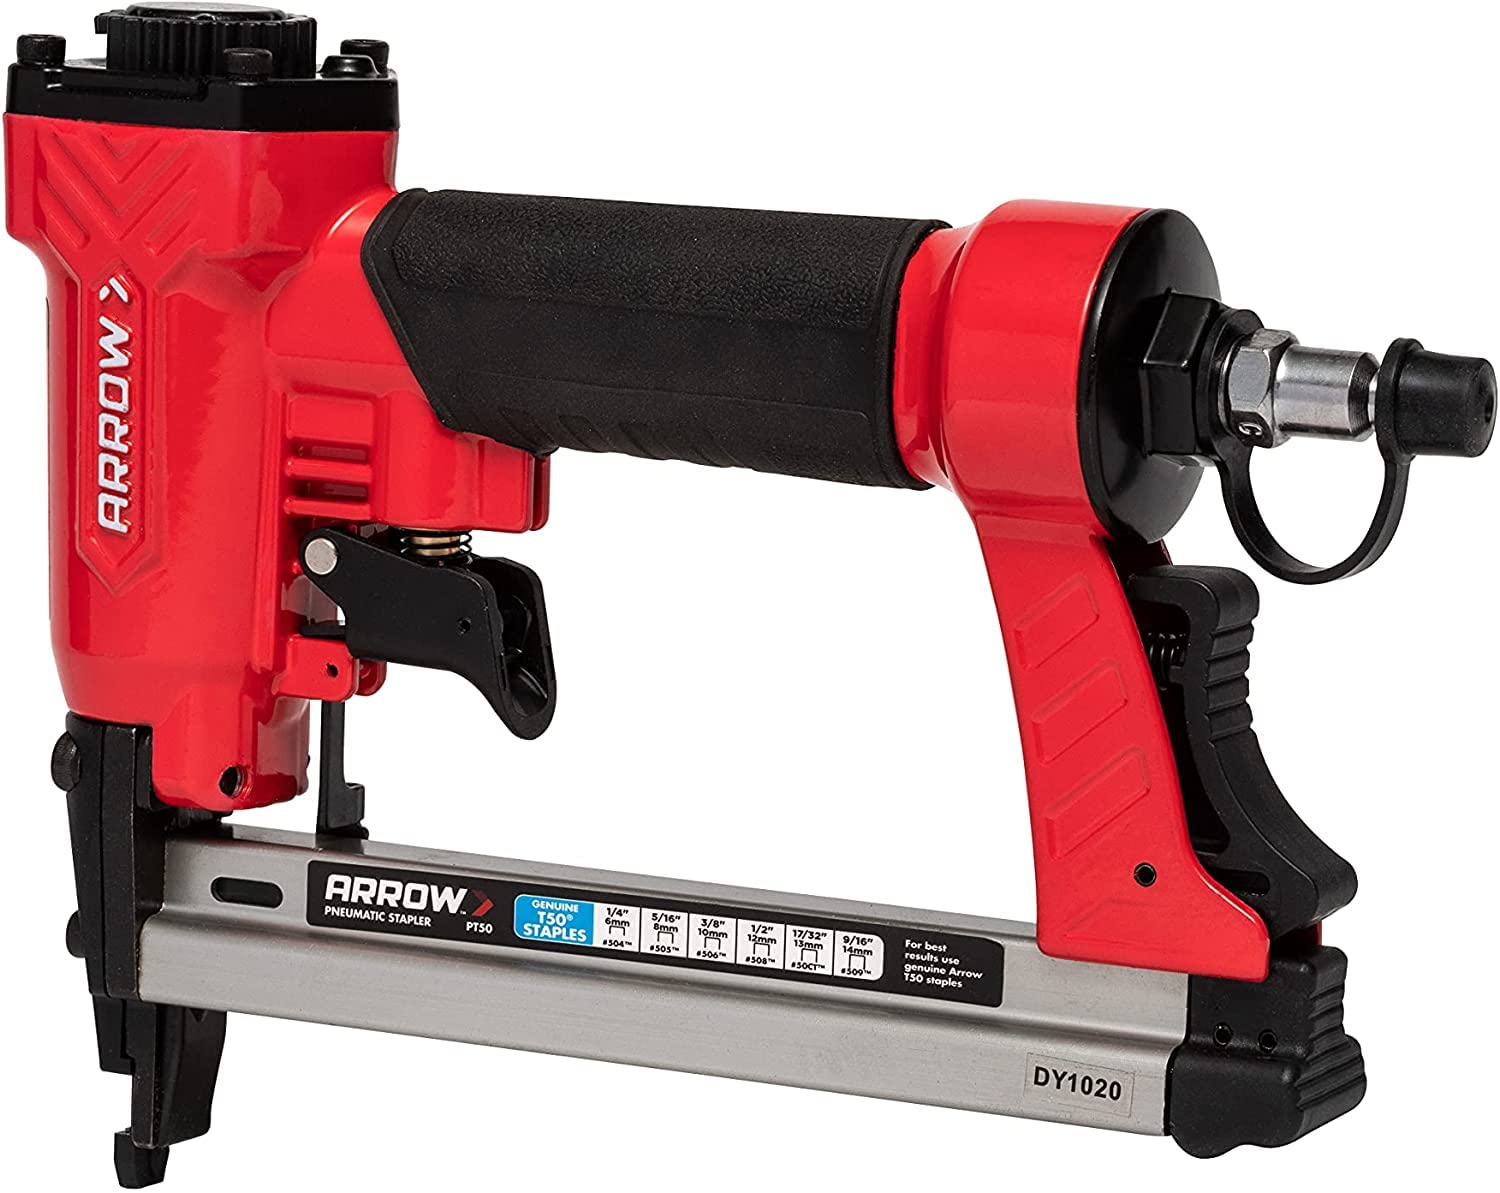 Arrow PT50 Oil-Free Pneumatic Staple Gun, Professional Heavy-Duty Stapler for Wood, Upholstery, Carpet, Wire Fencing, Fits 1/4”, 5/16”, 3/8